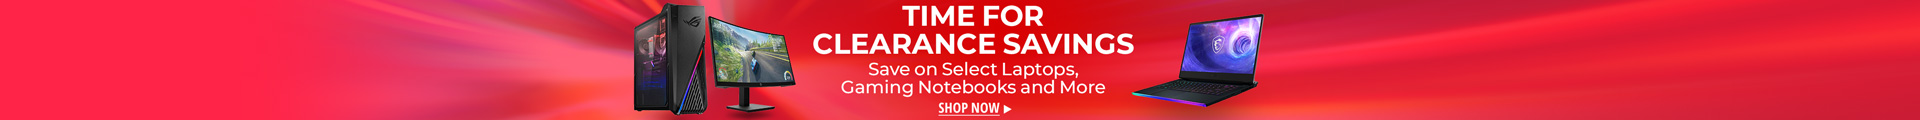 Time For Clearance Savings